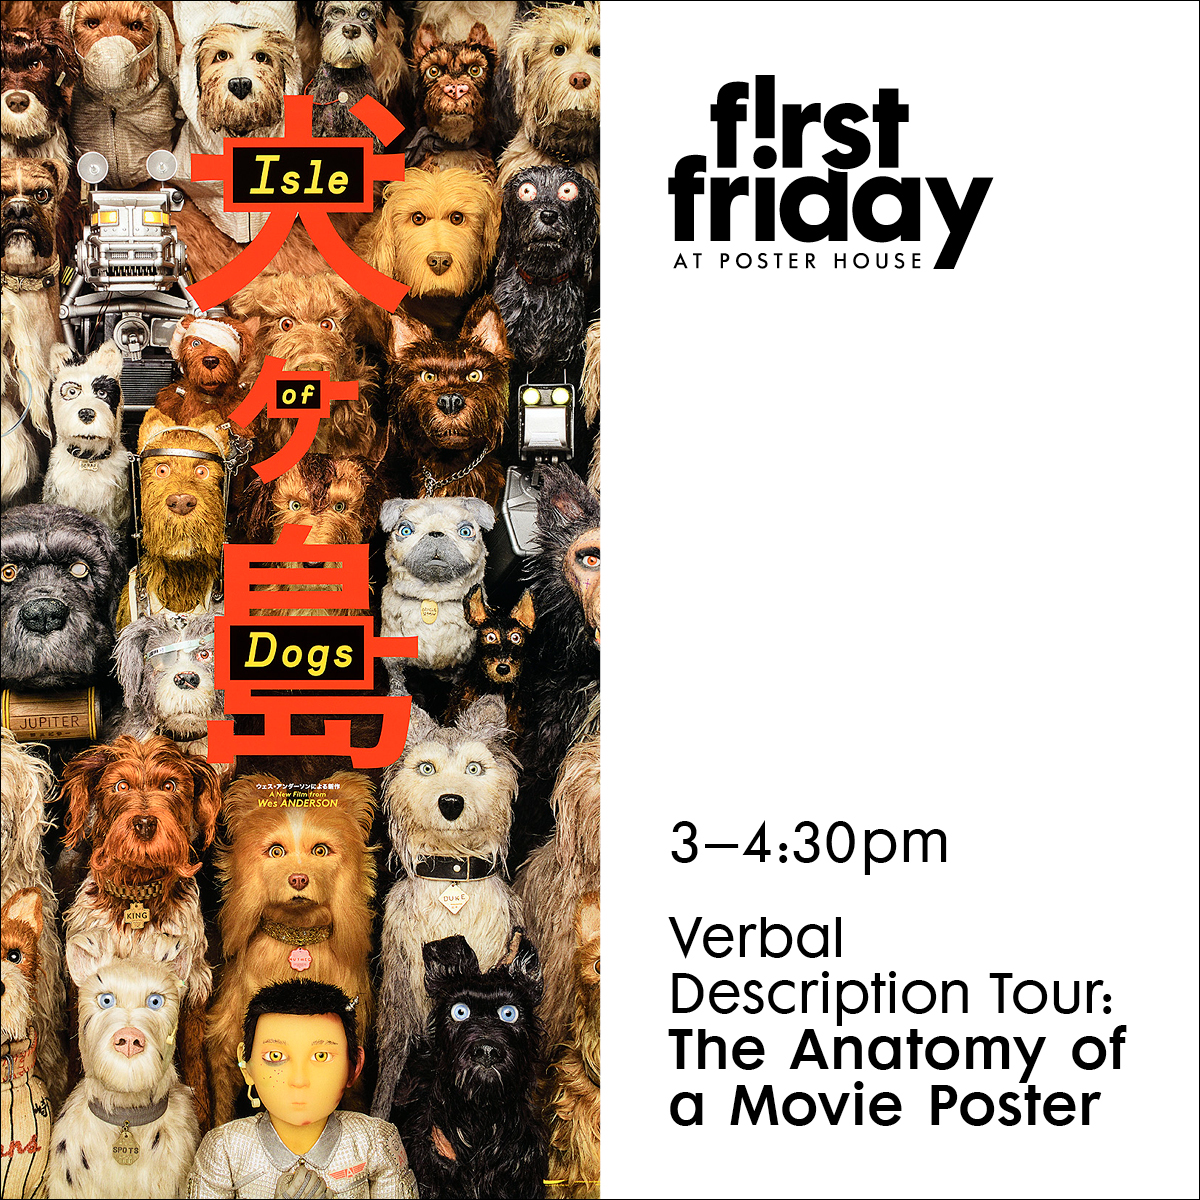 A digital event poster featuring the Isle of Dogs poster